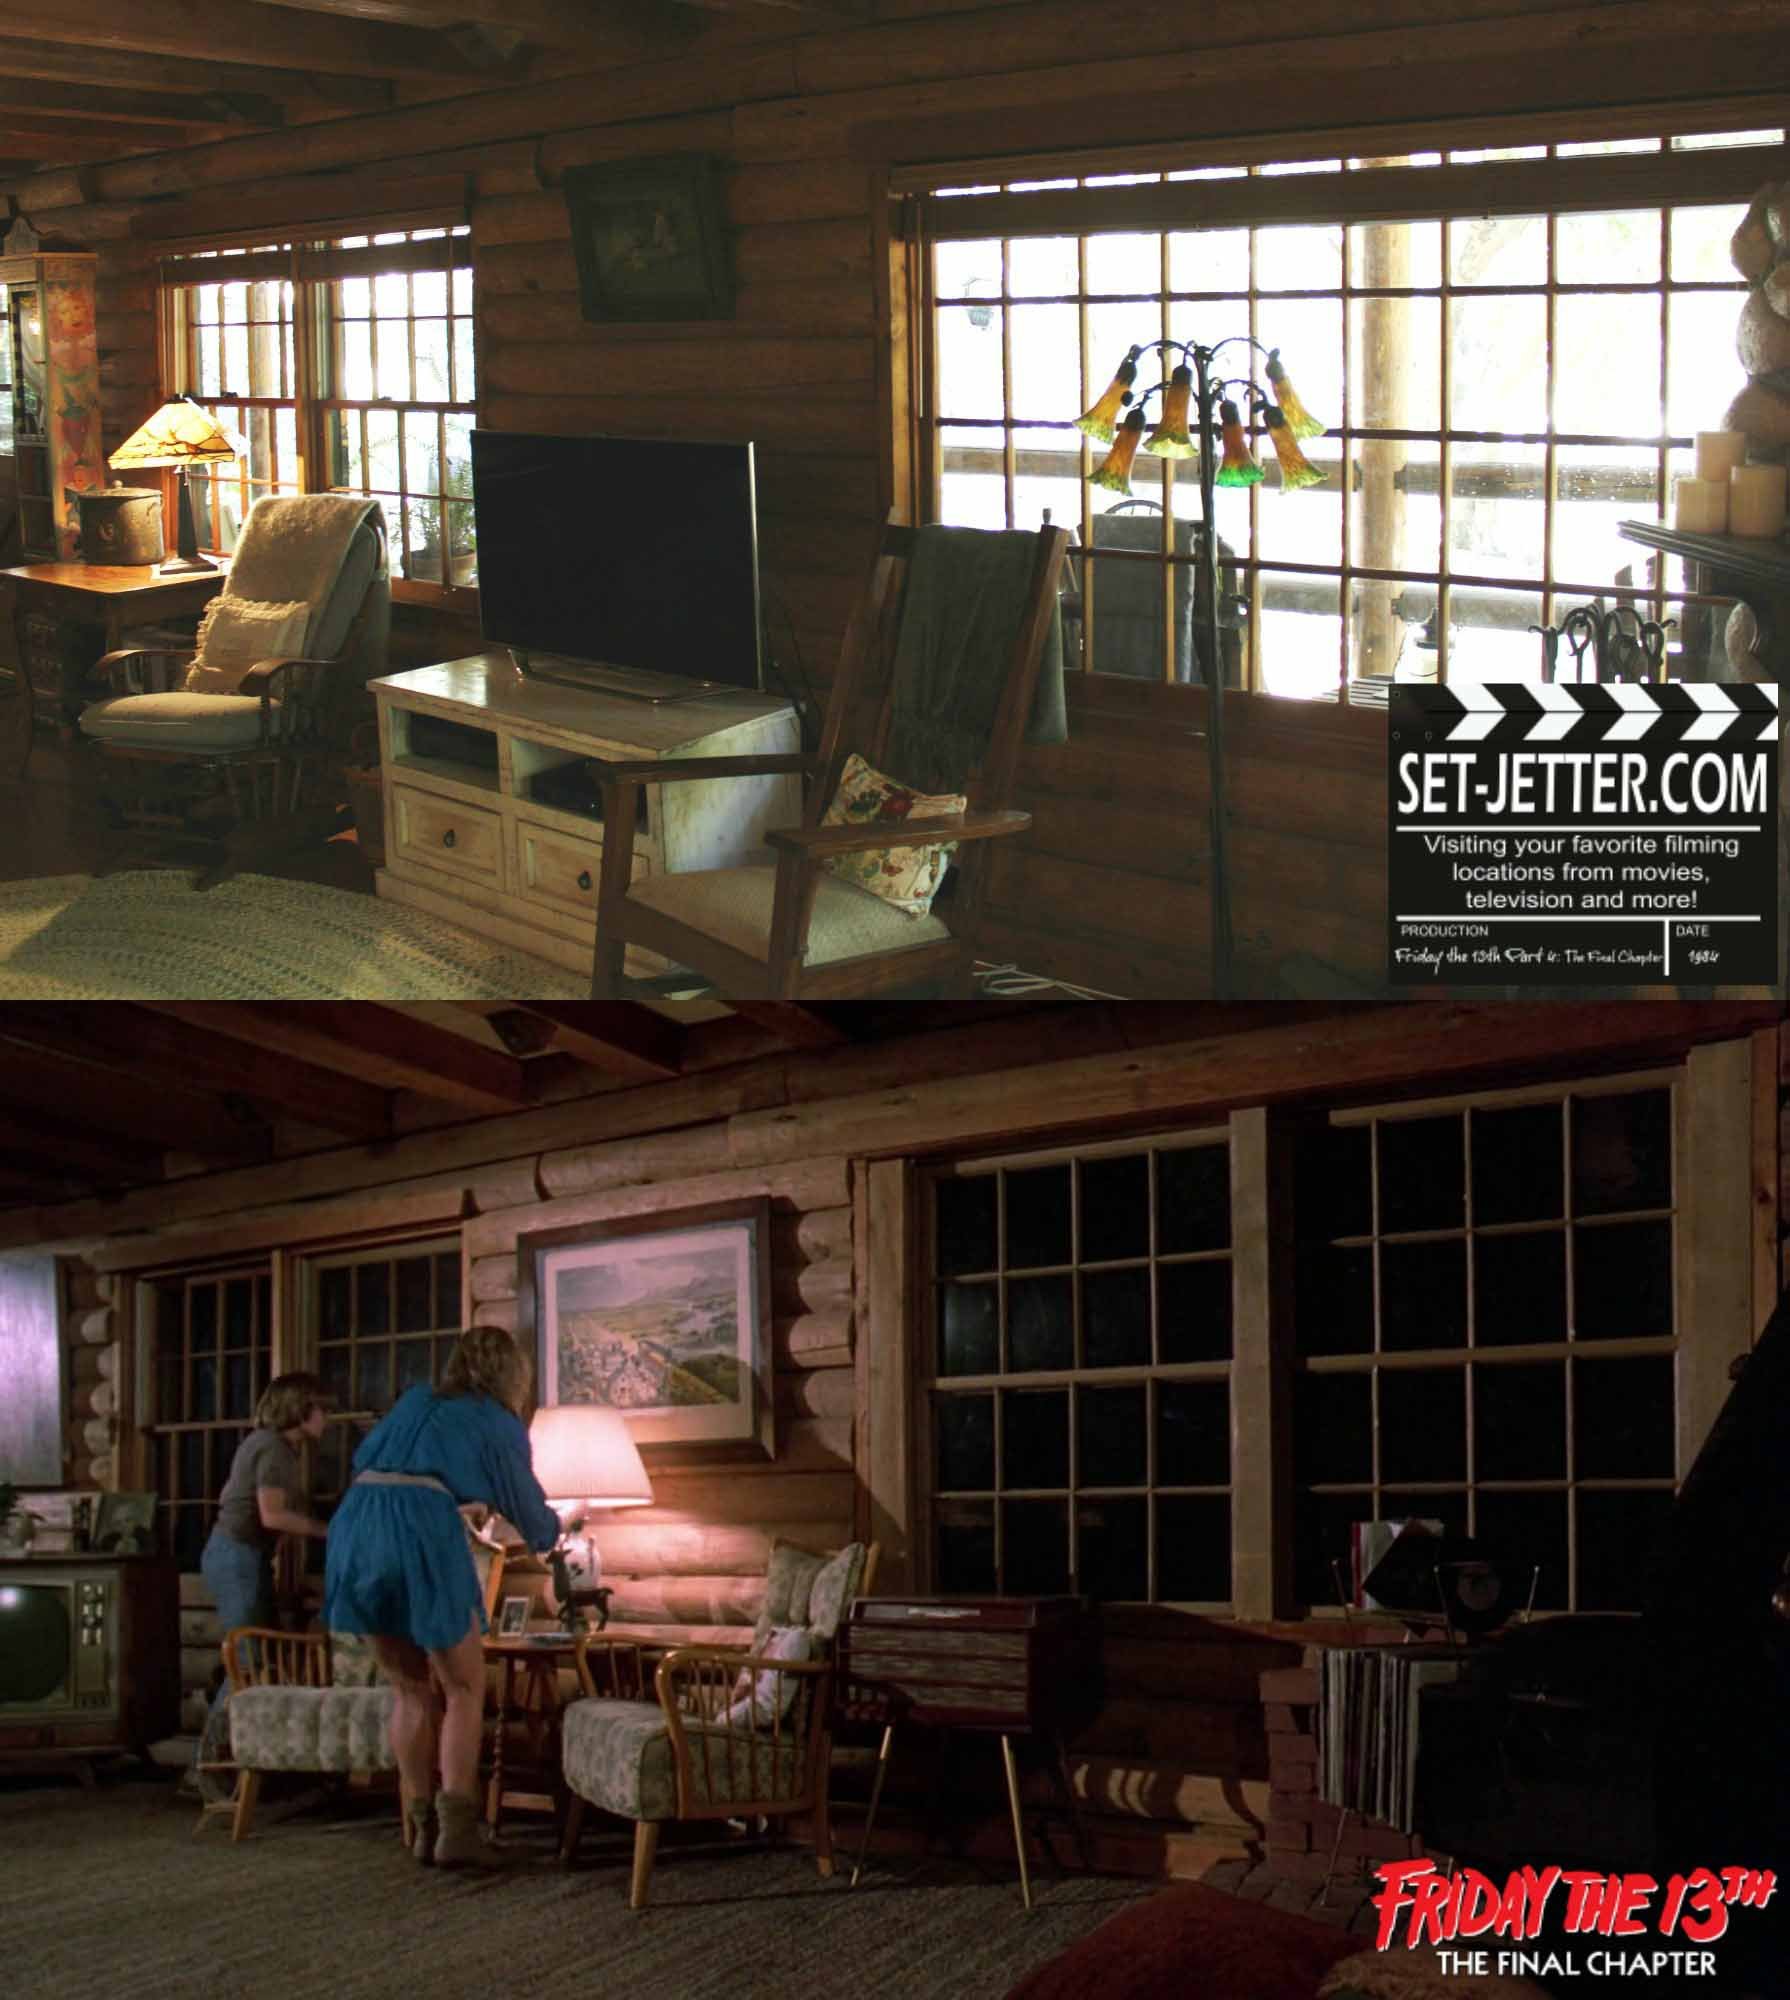 Friday the 13th The Final Chapter comparison 203.jpg